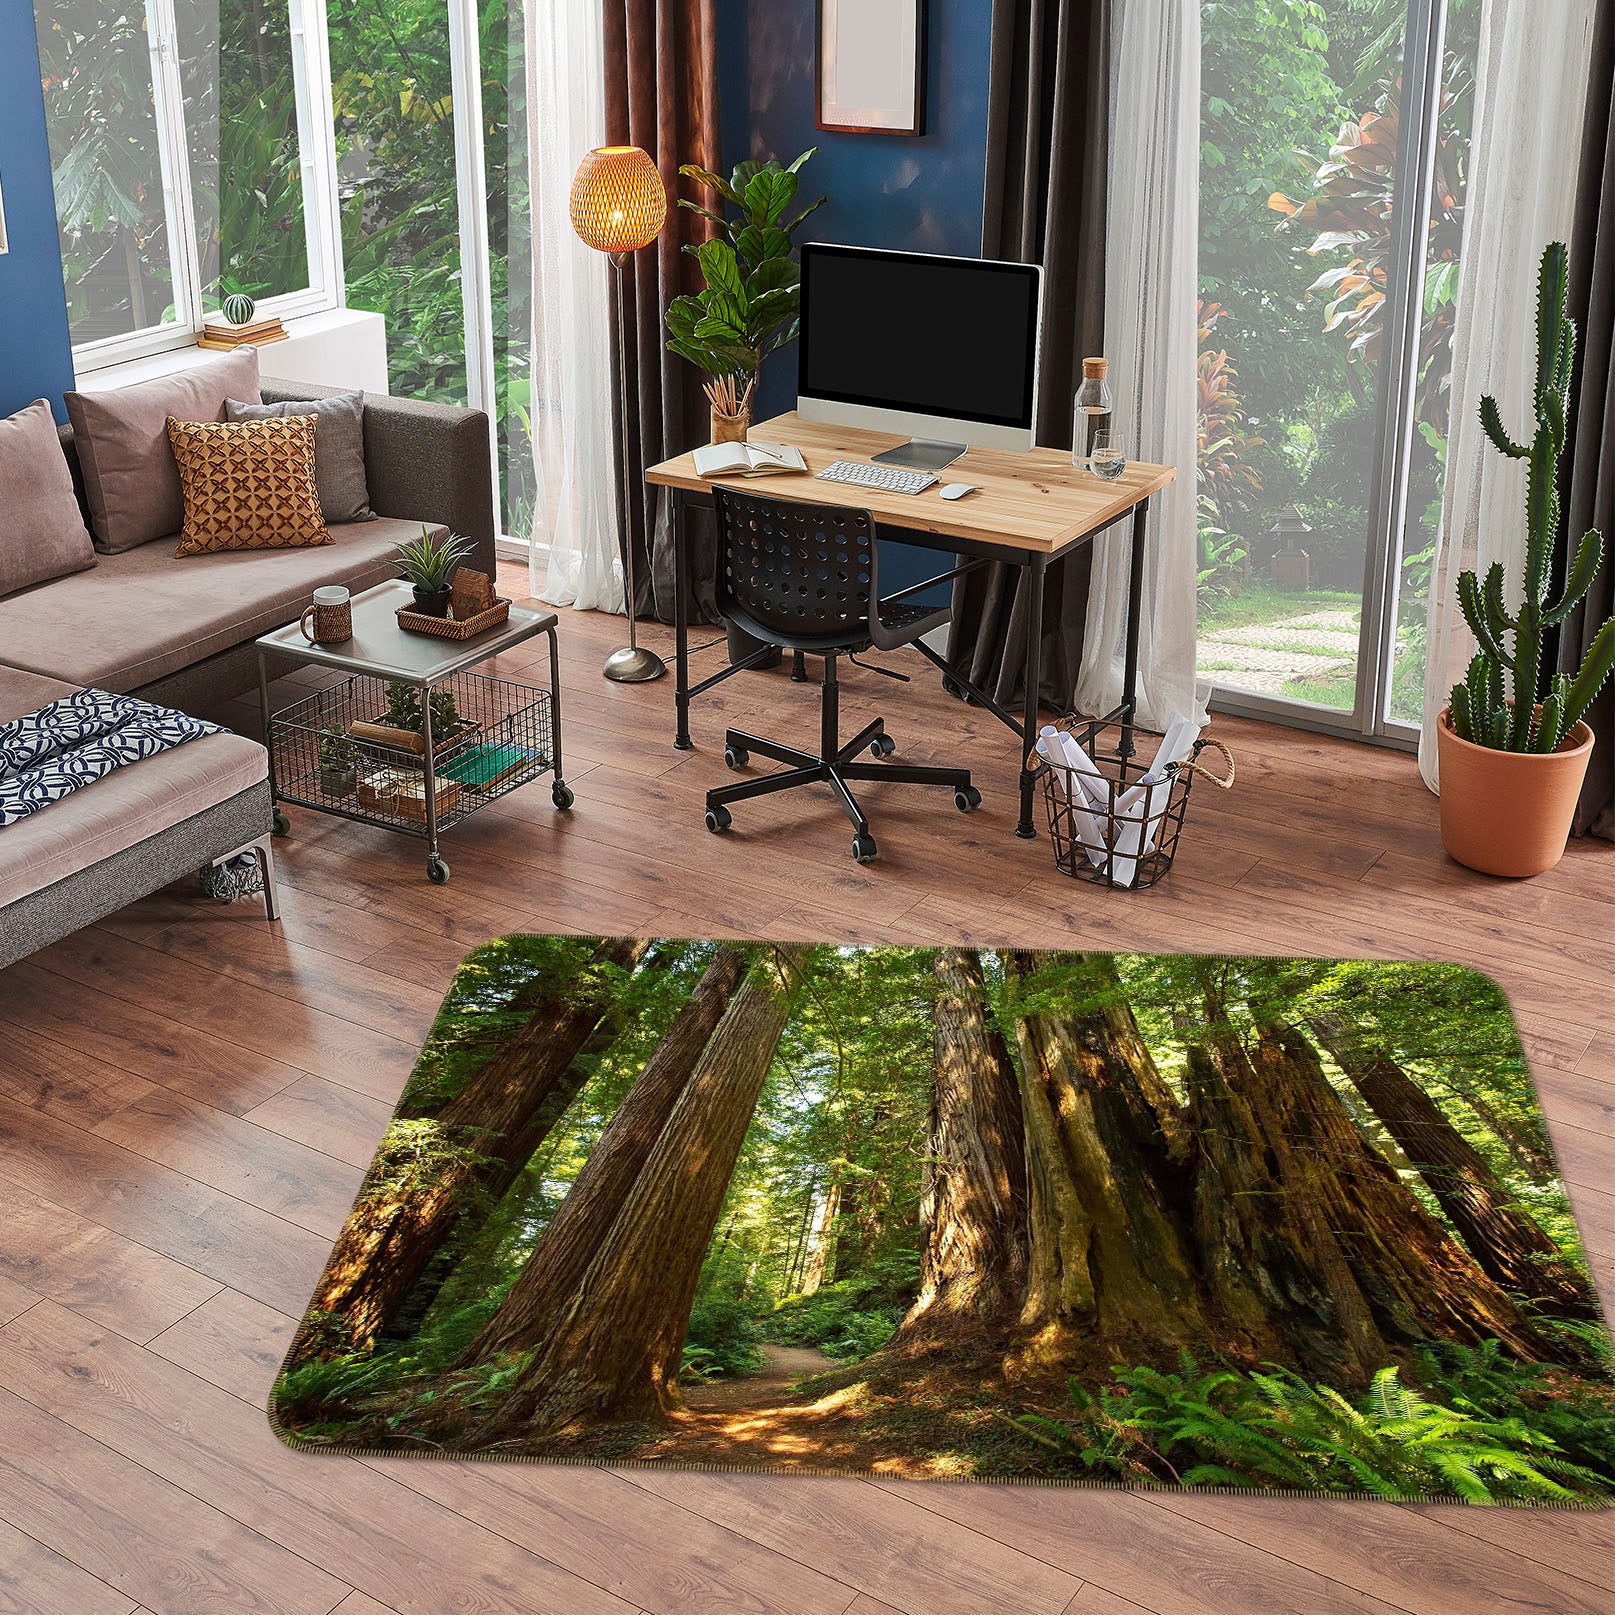 3D Old Forest 1122 Kathy Barefield Rug Non Slip Rug Mat